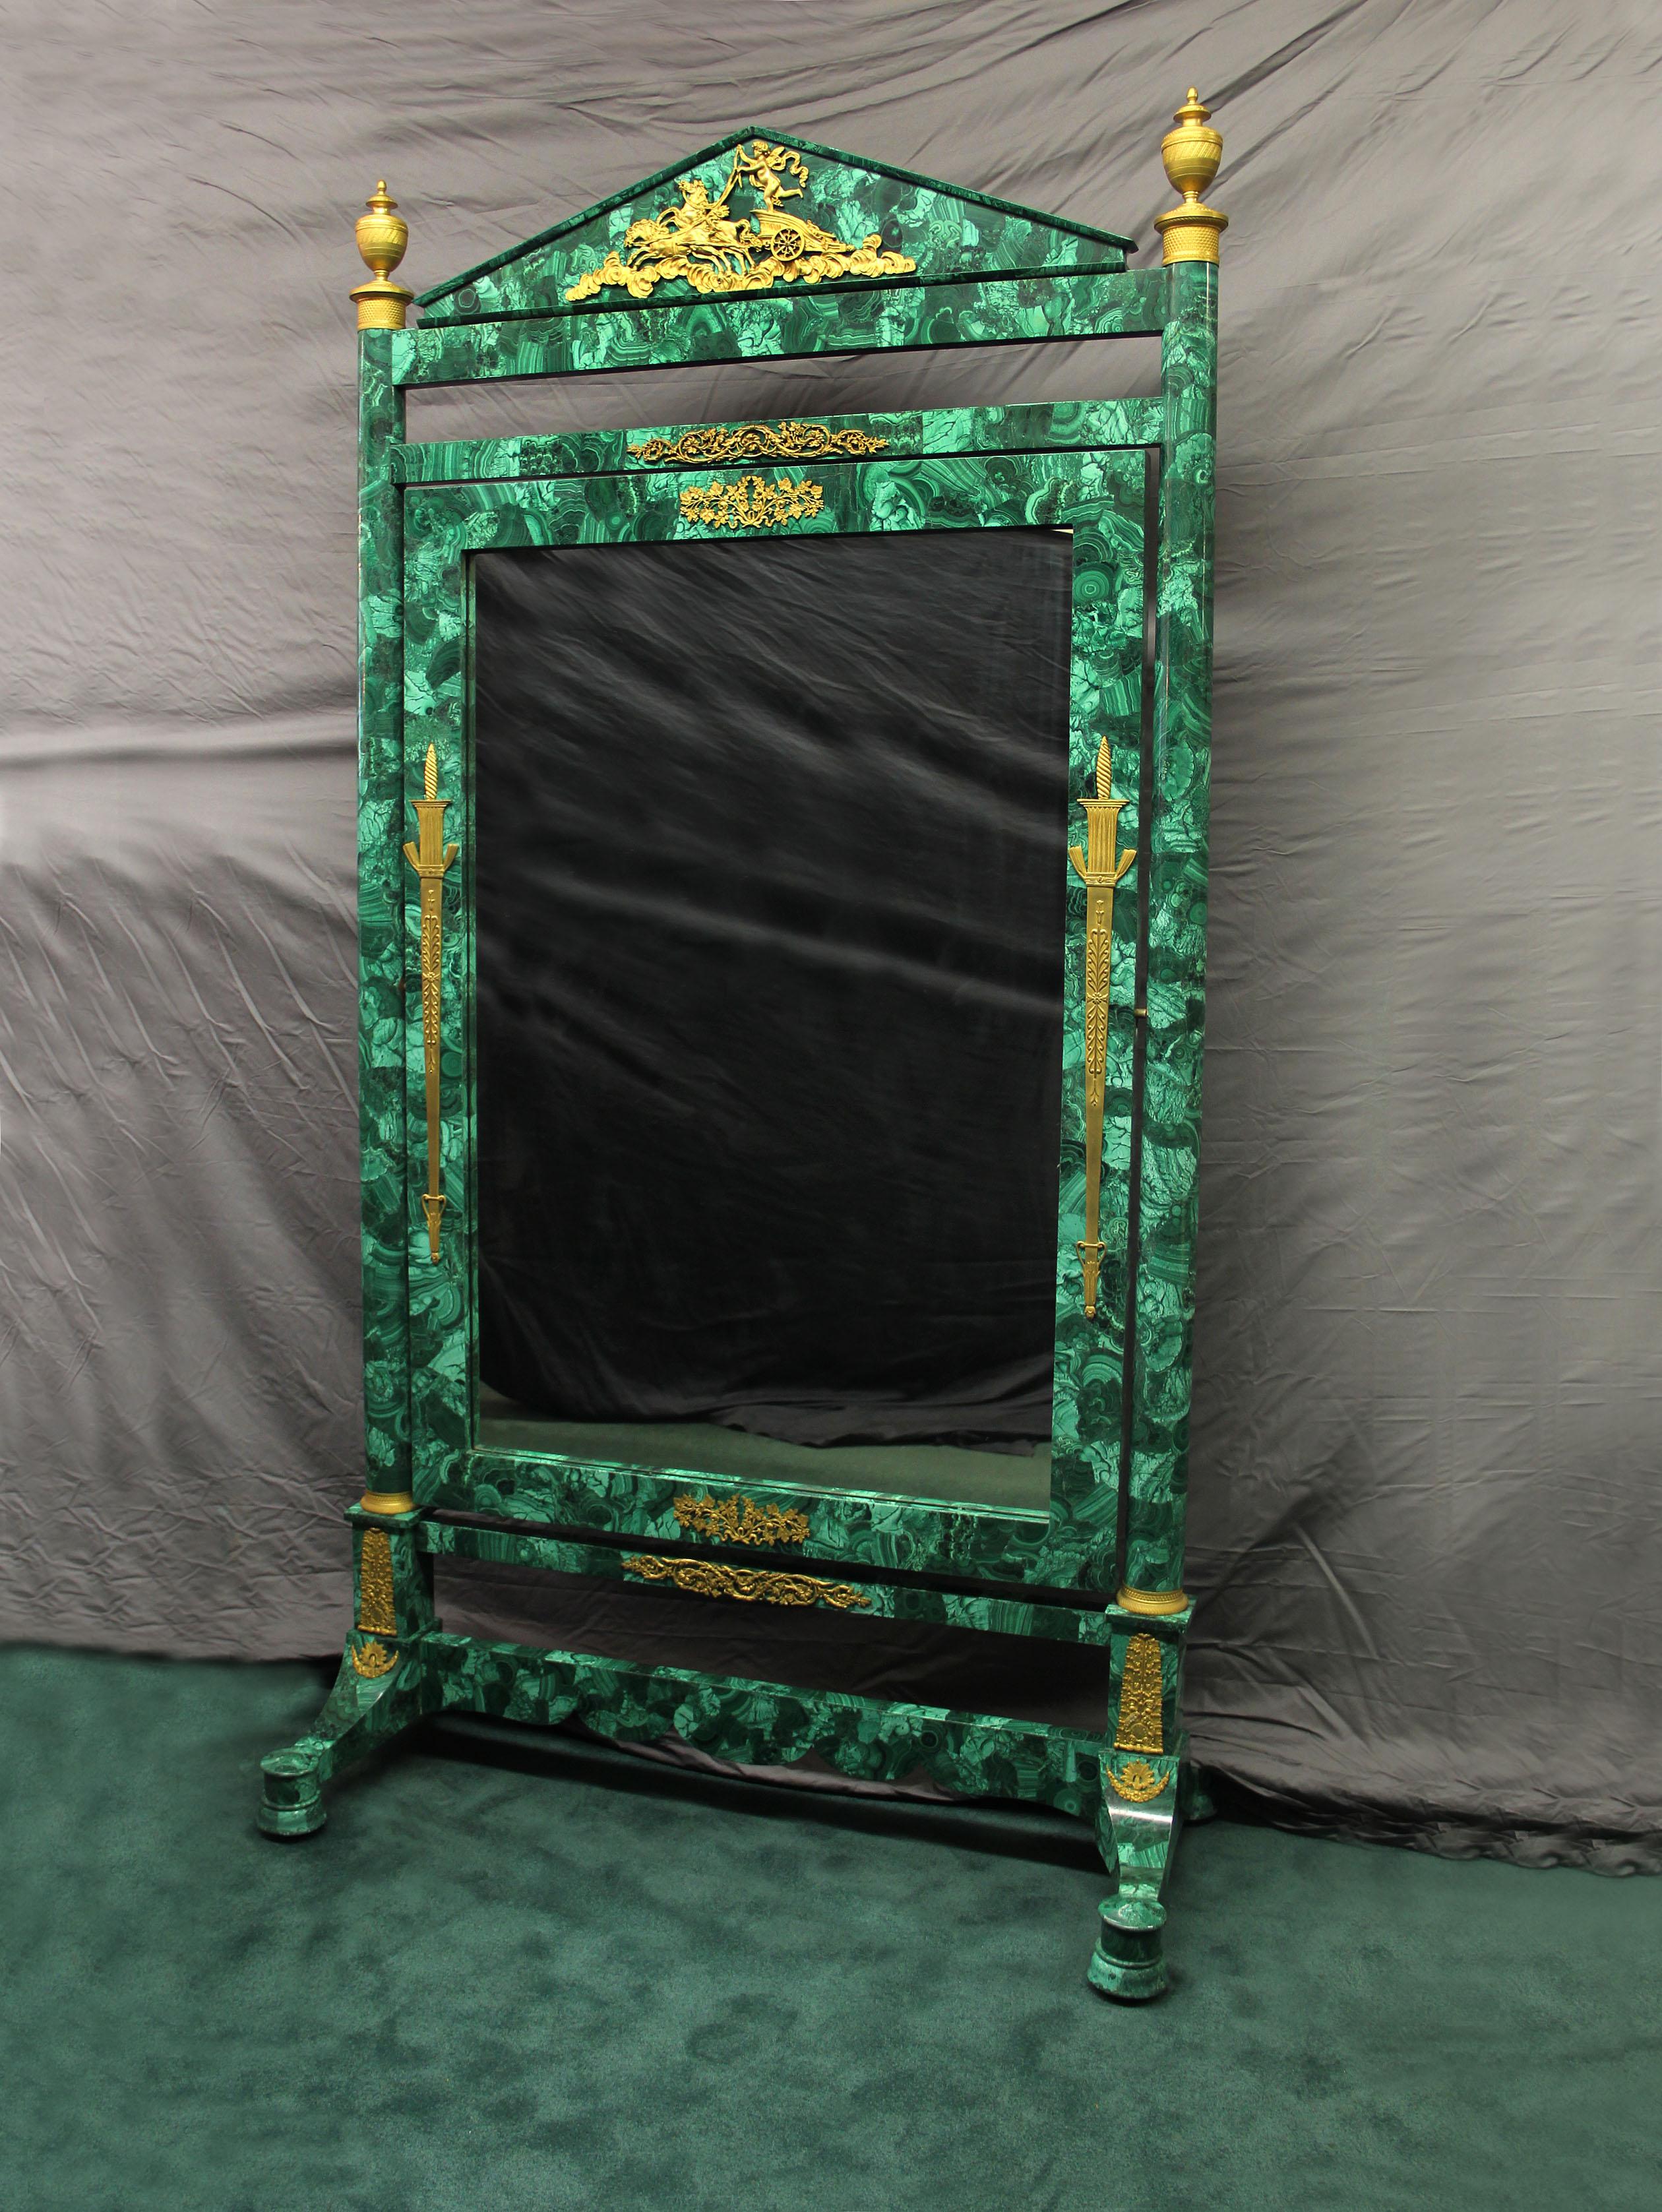 A beautiful late 19th century gilt bronze-mounted Napoleon III malachite dressing mirror.

Decorative bronze scene of a cheurb on a horse drawn chairot riding through the clouds. Bronze foliage and grapes decorate the top and base of the mirror.